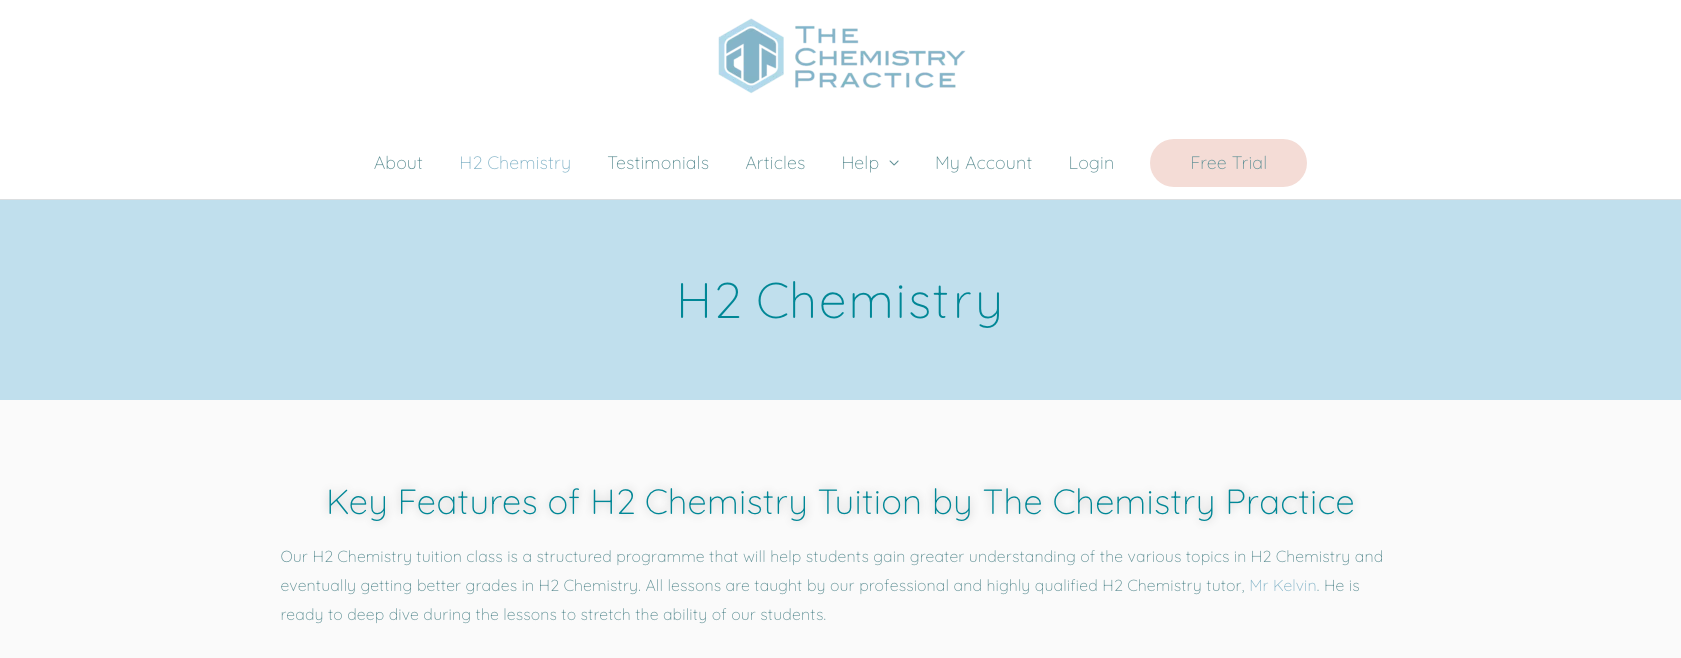 The Chemistry Practice Educational Website